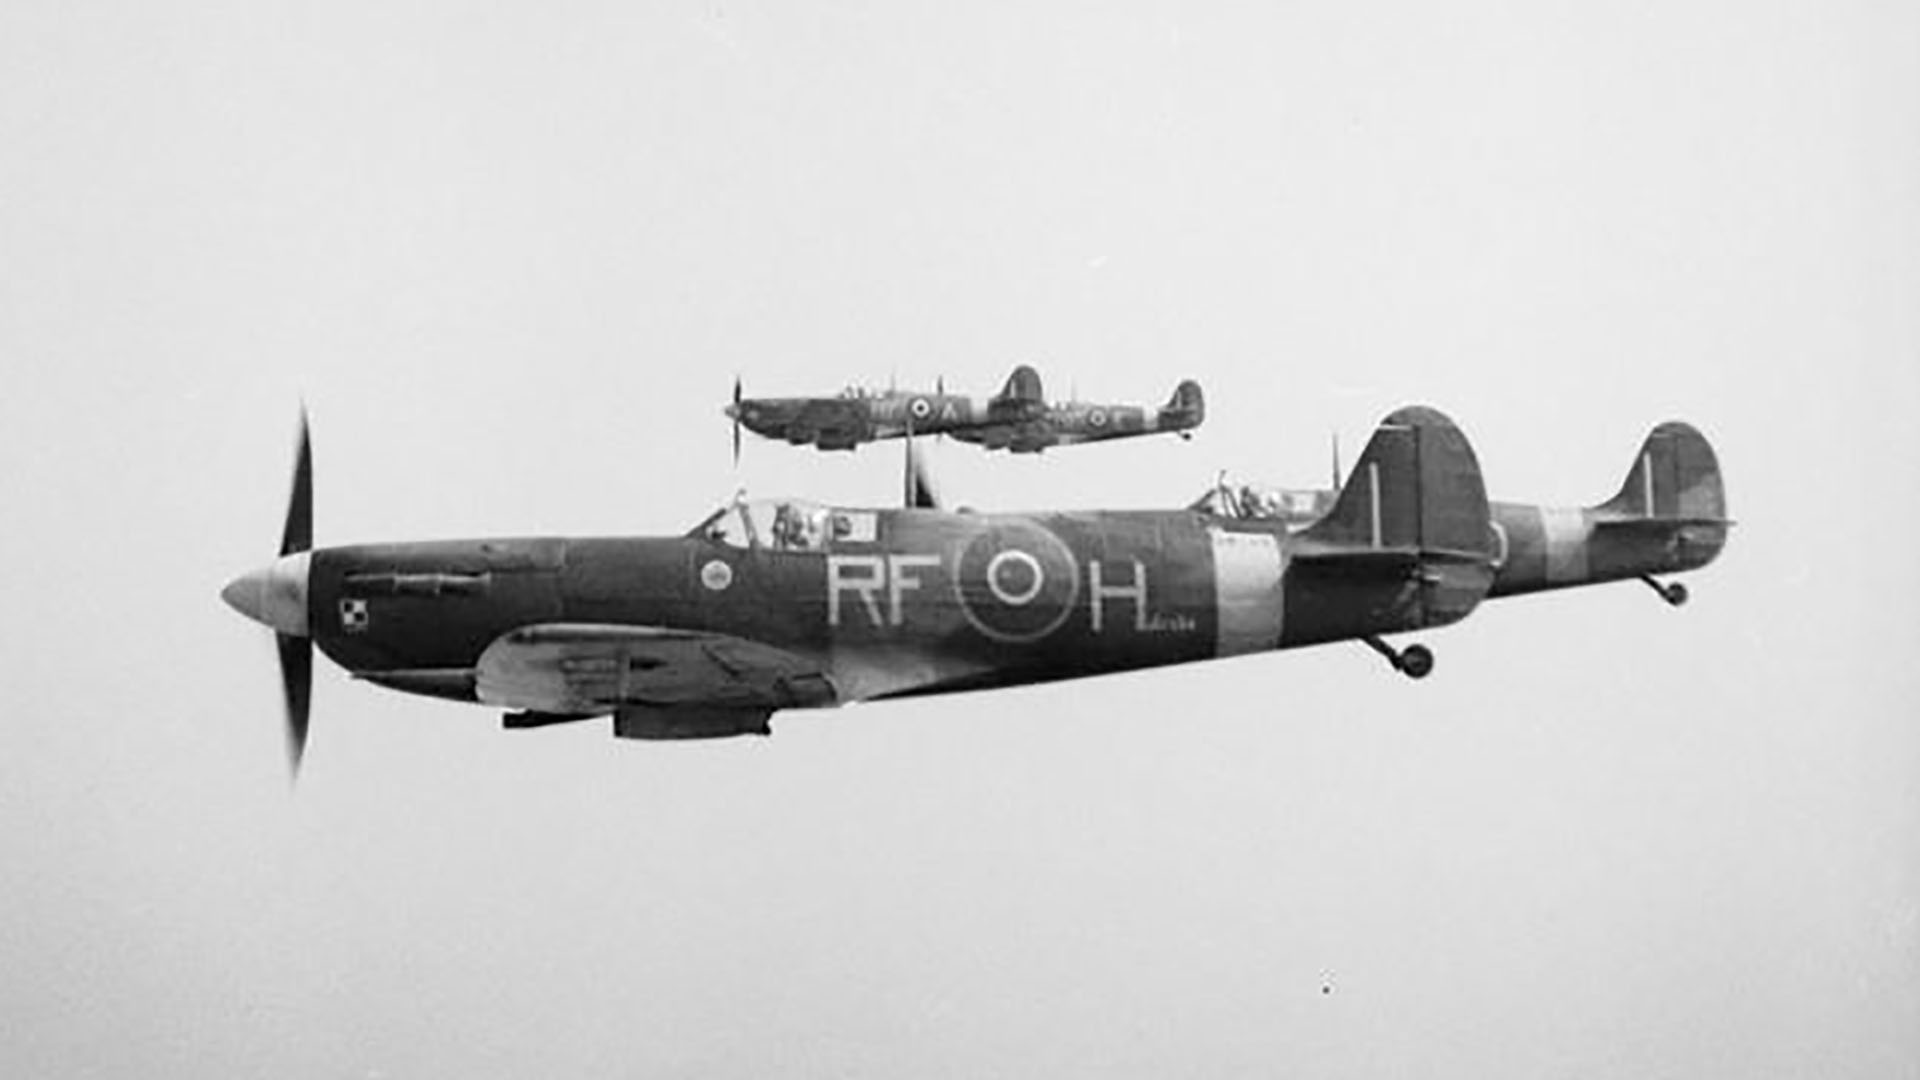 A formation of Mark VB Supermarine Spitfires of R.A.F. 303 (Kościuszko) Squadron escorting General Bernard Montgomery's Boeing B-17 from Prestwick to Northolt on his return from North Africa on 17th May 1943. Supermarine Spitfire V BM144 RF-H is likely flown by Squadron Leader Zygmunt Bieńkowski.